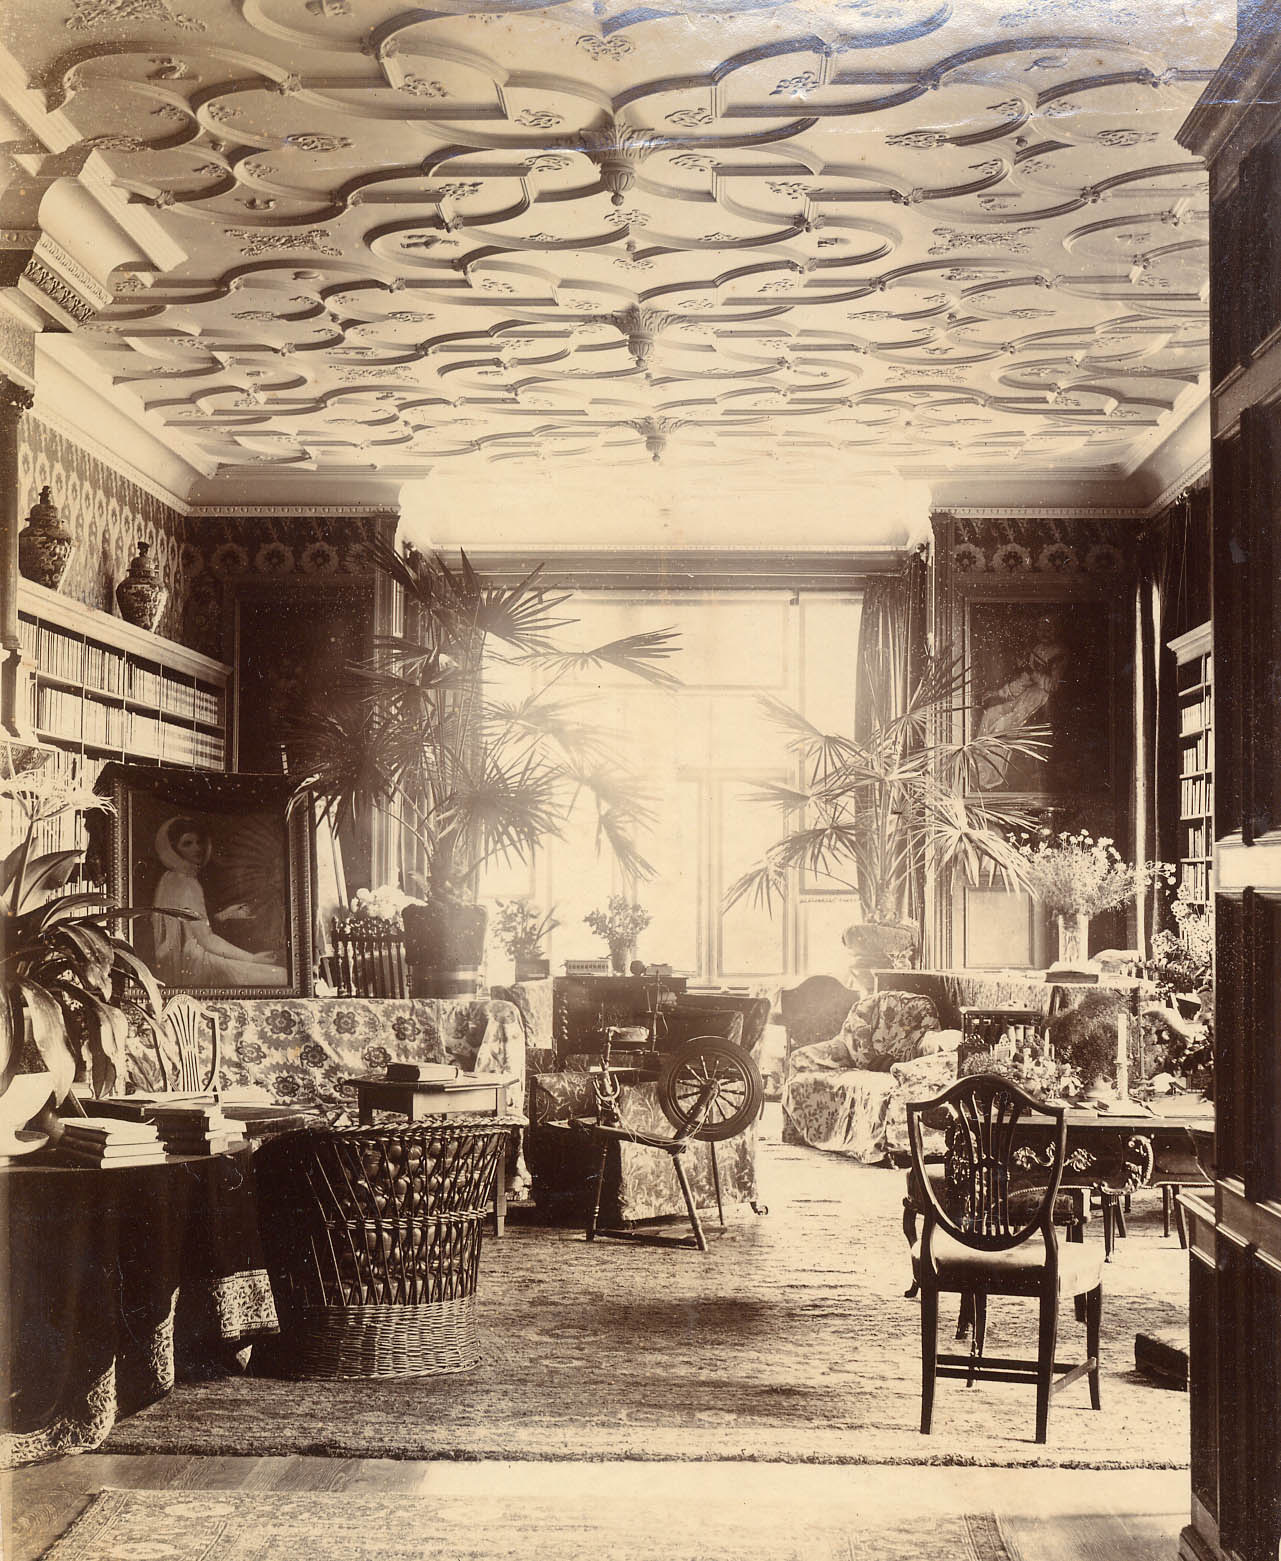 Historic photographs show the library to be a family space used for socialising and entertaining in the 1890’s